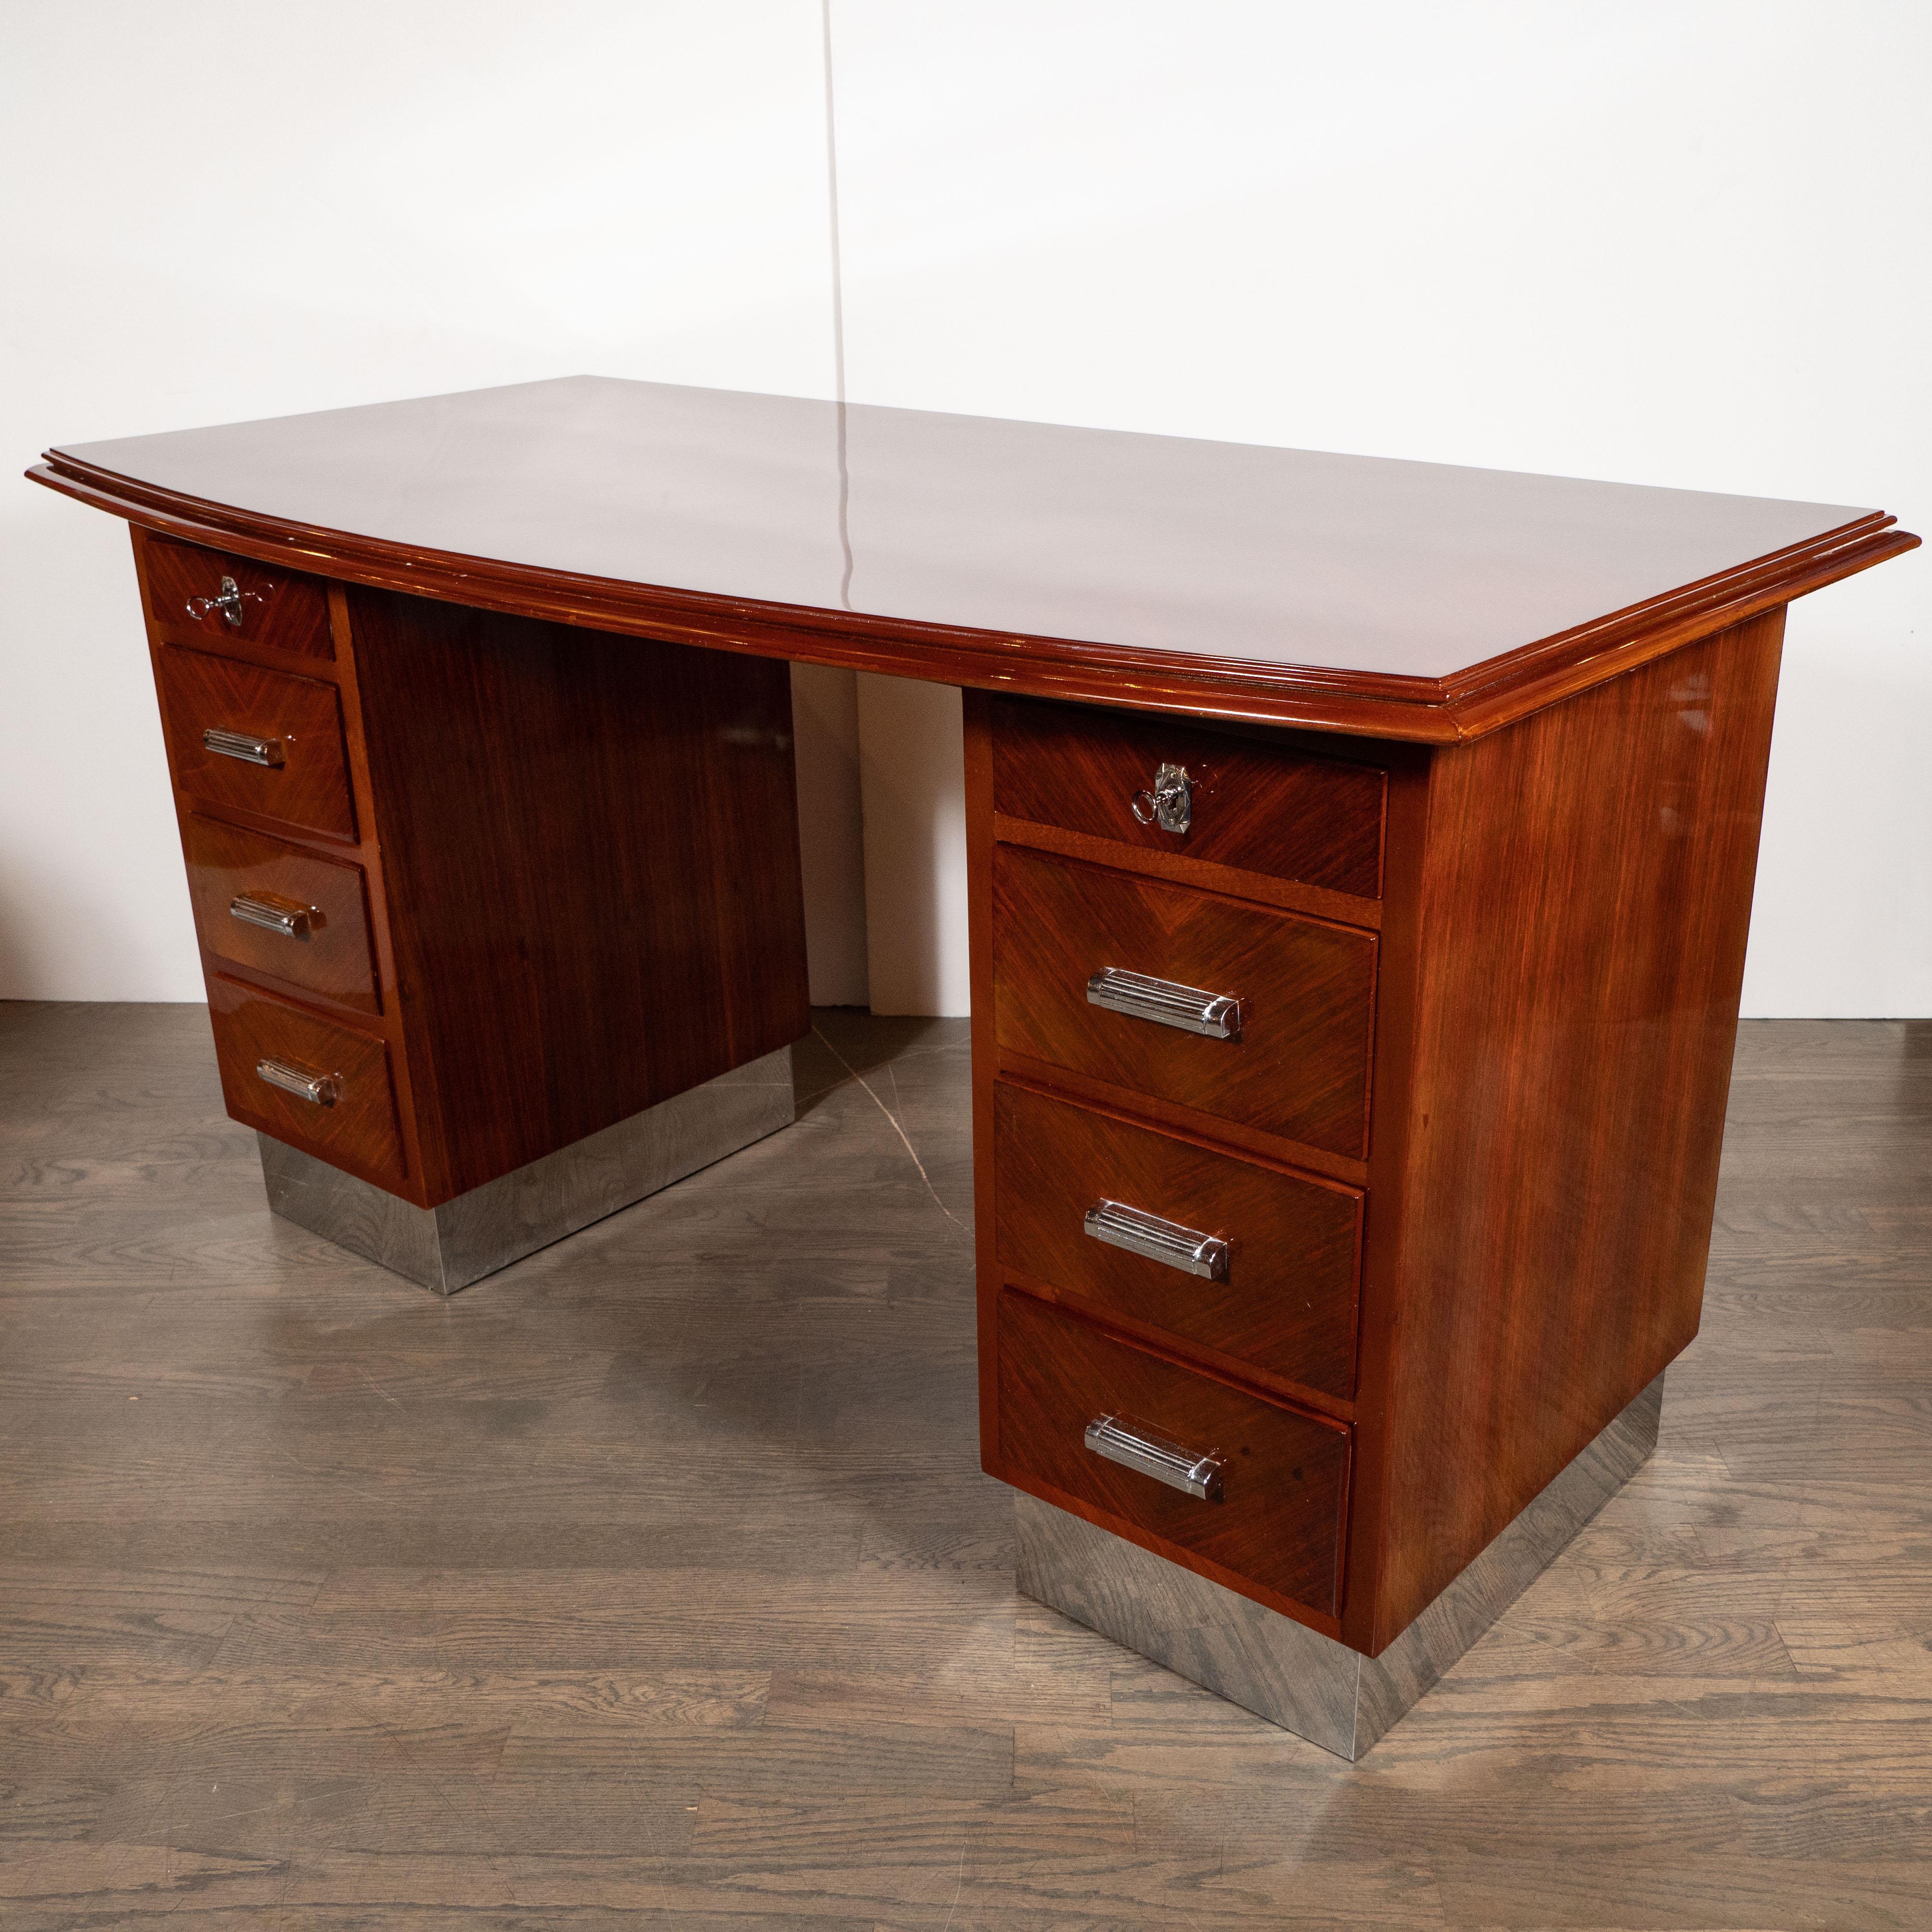 Mid-20th Century Art Deco Machine Age Bookmatched Bowfront Rosewood Desk with Nickel Wrapped Base